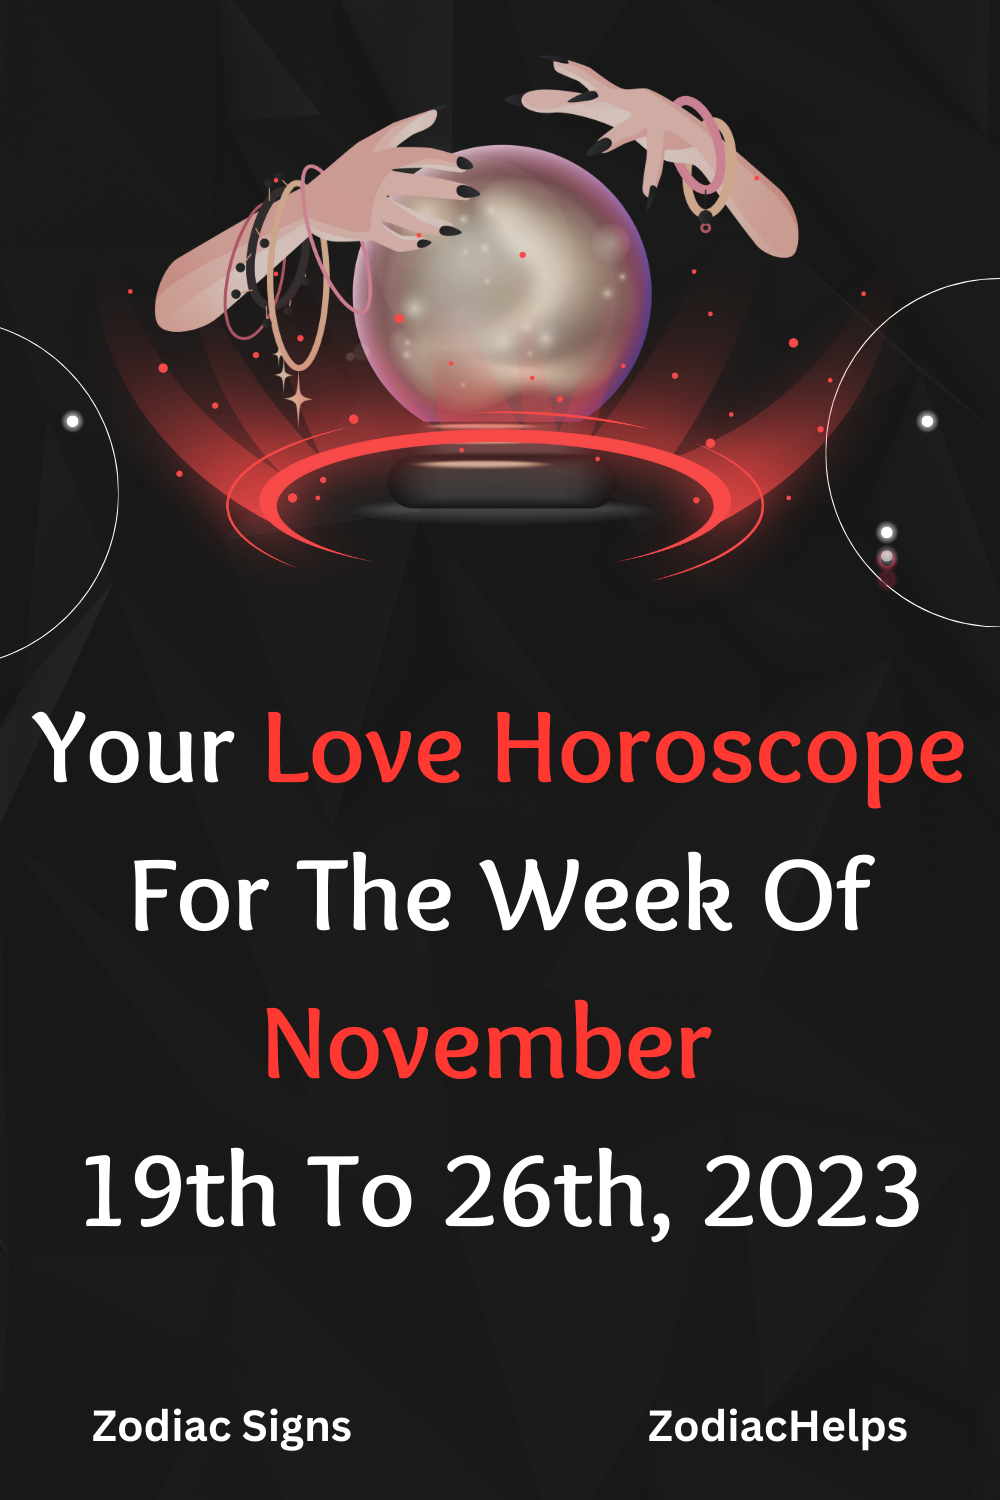 Your Love Horoscope For The Week From November 19th To 26th, 2023